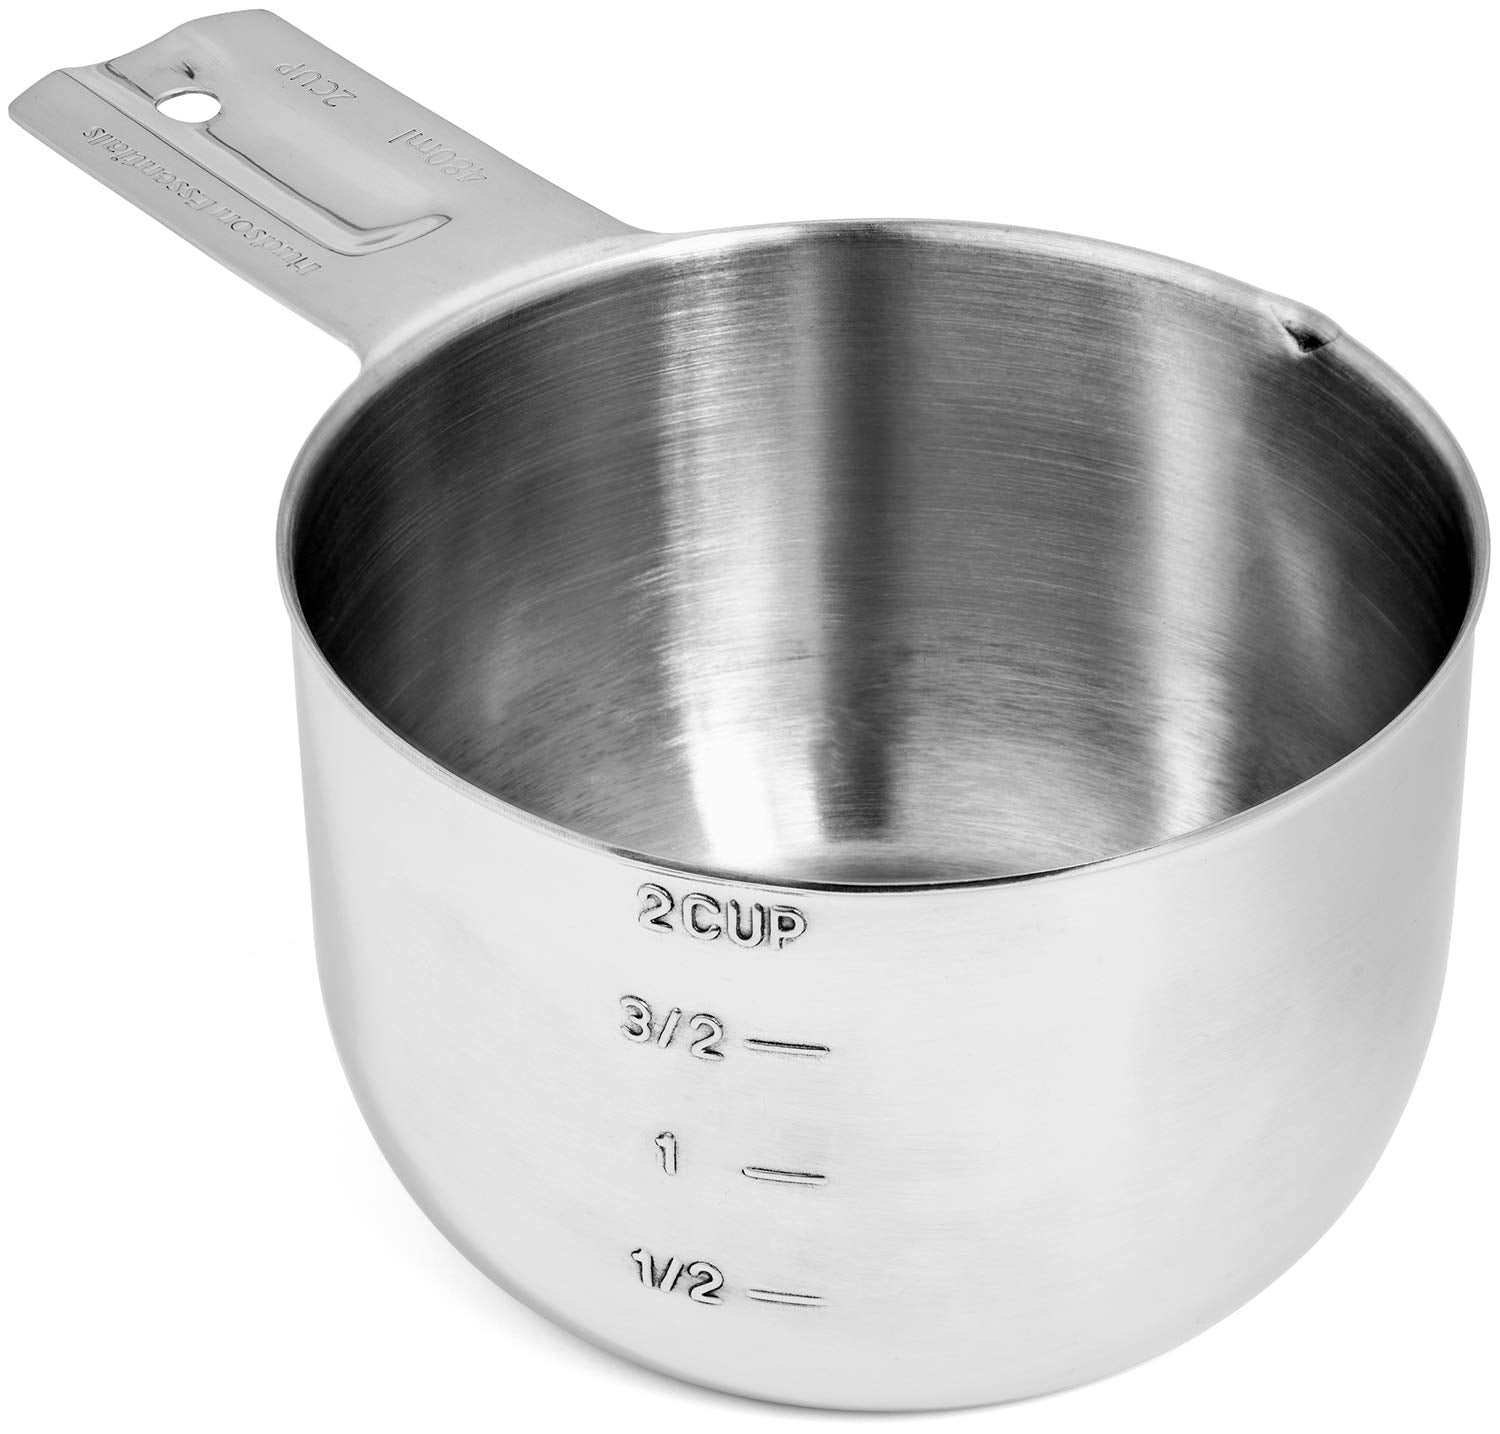 Stainless Steel Dry Measuring Cup Set, 4 Piece - SANE - Sewing and